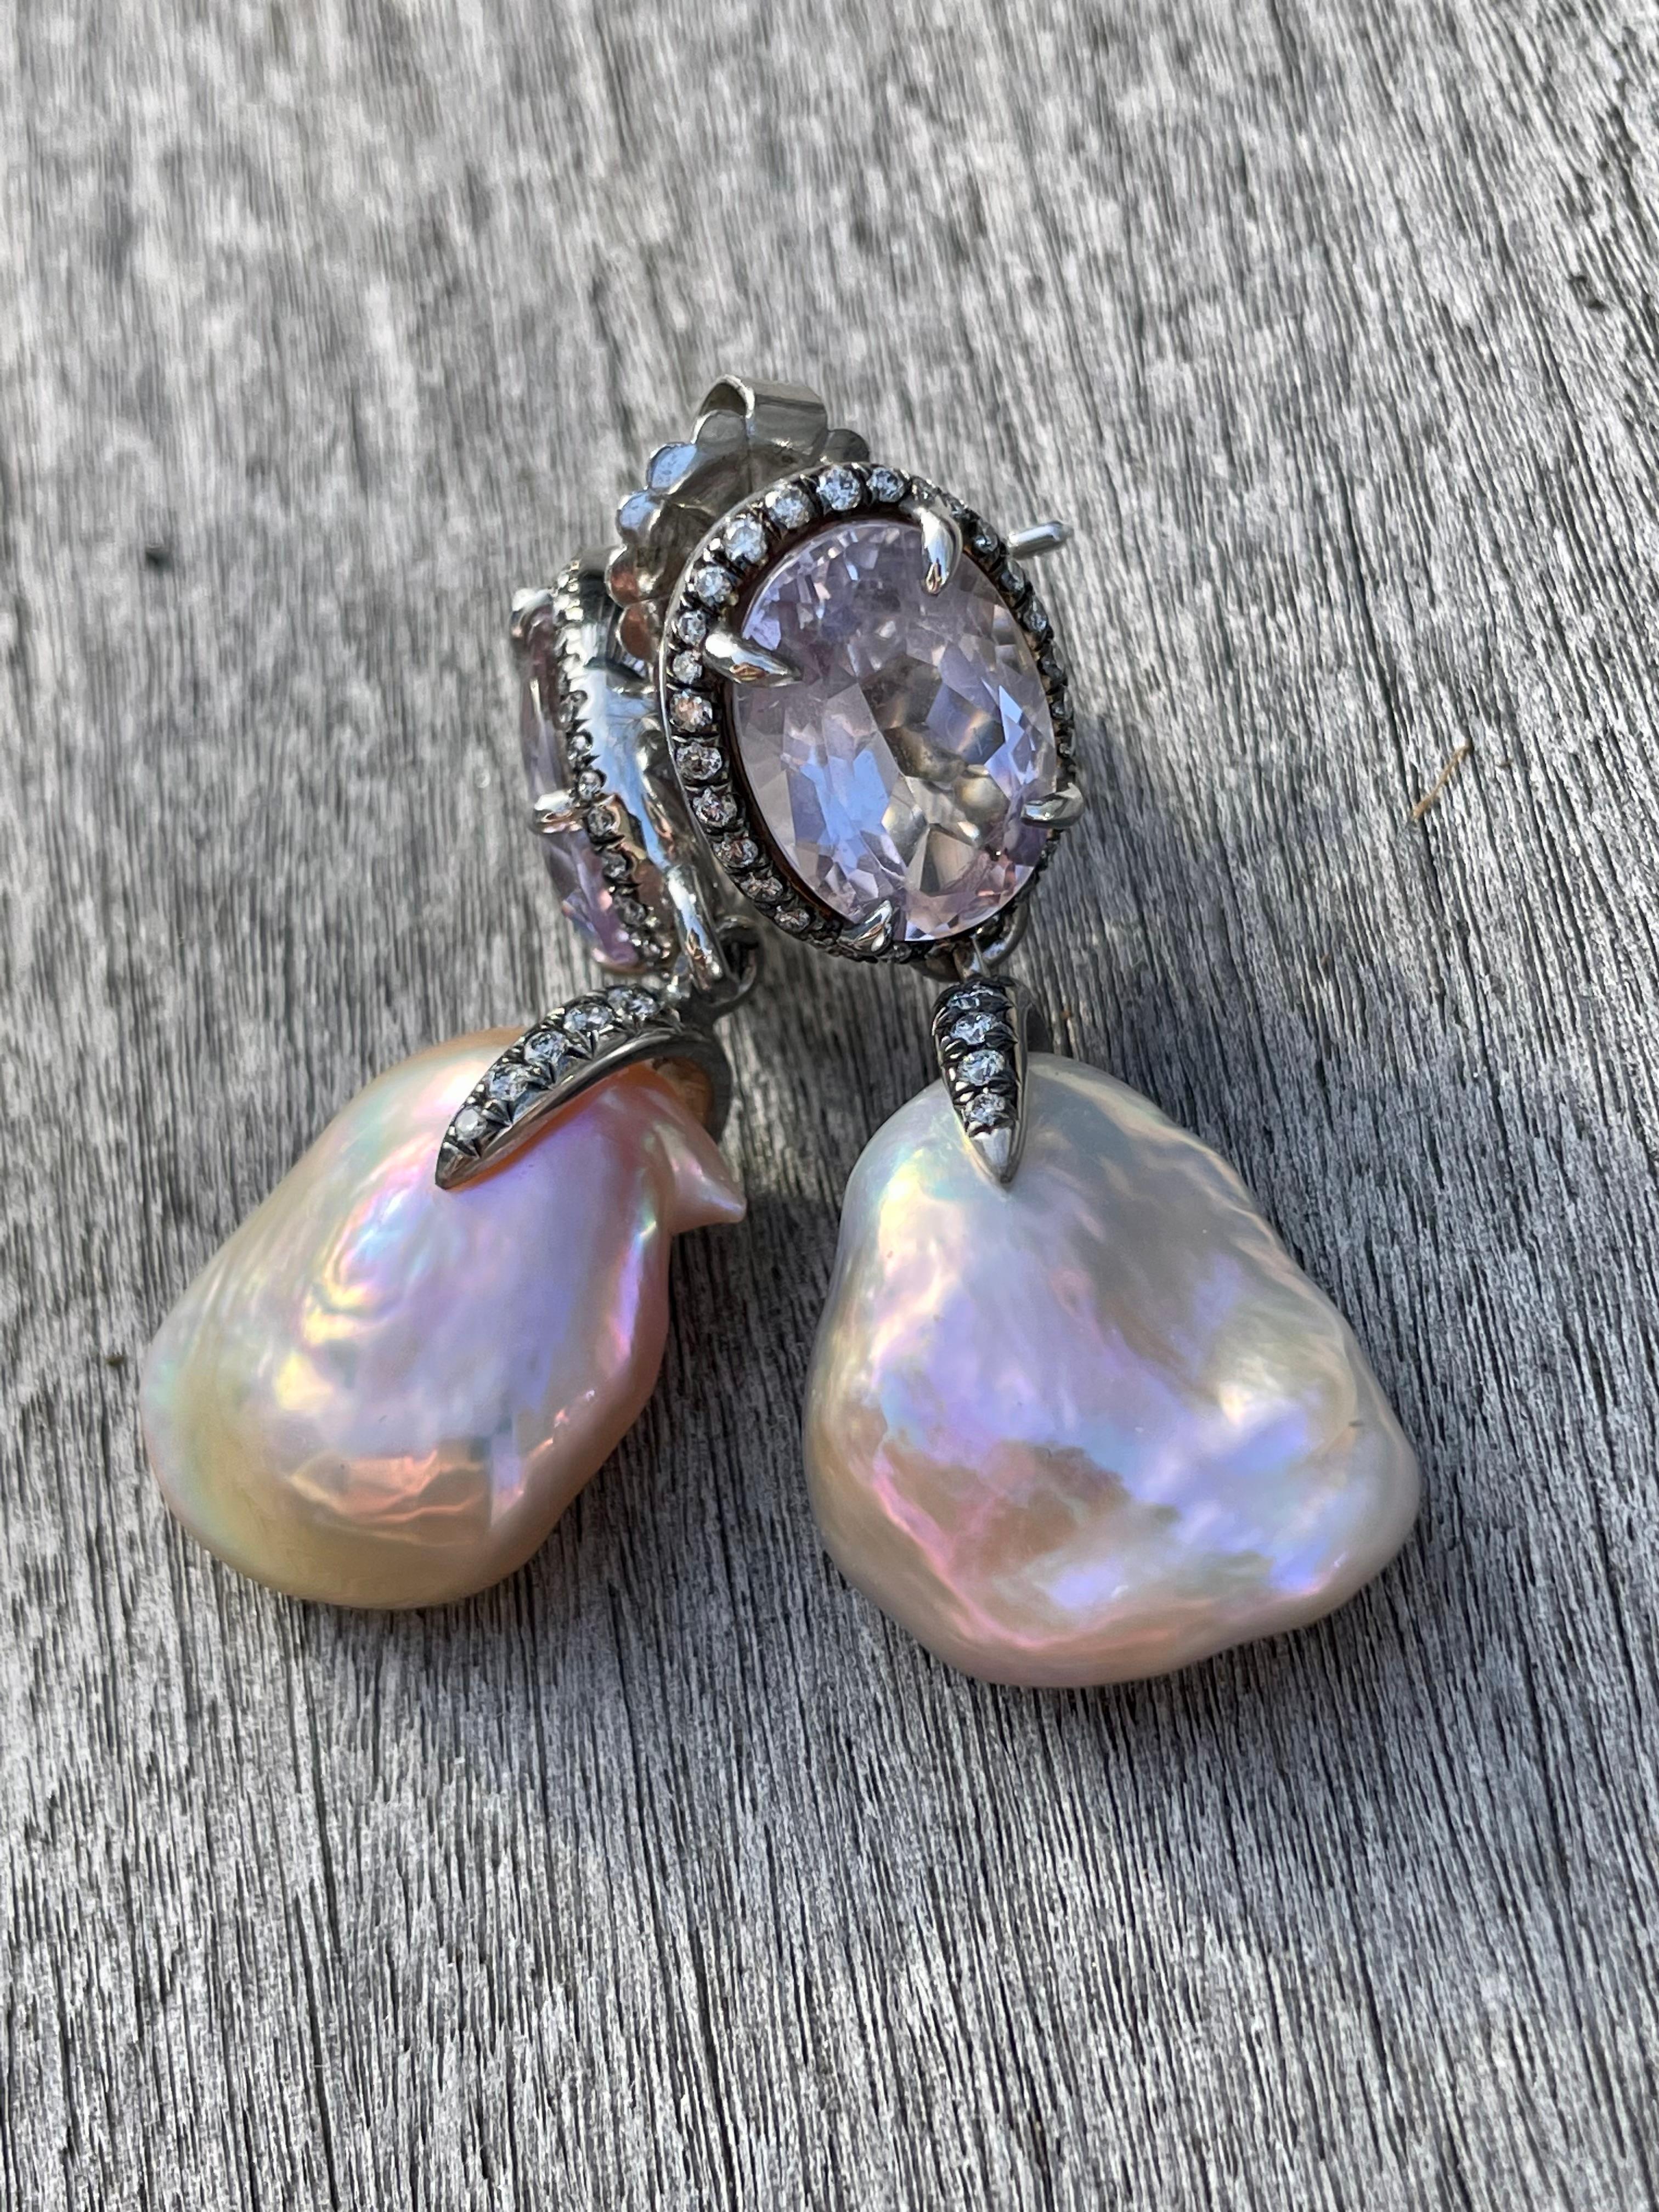 Oval Cut Pink Amethyst and Lavender Soufflé Pearl Drop Earrings For Sale